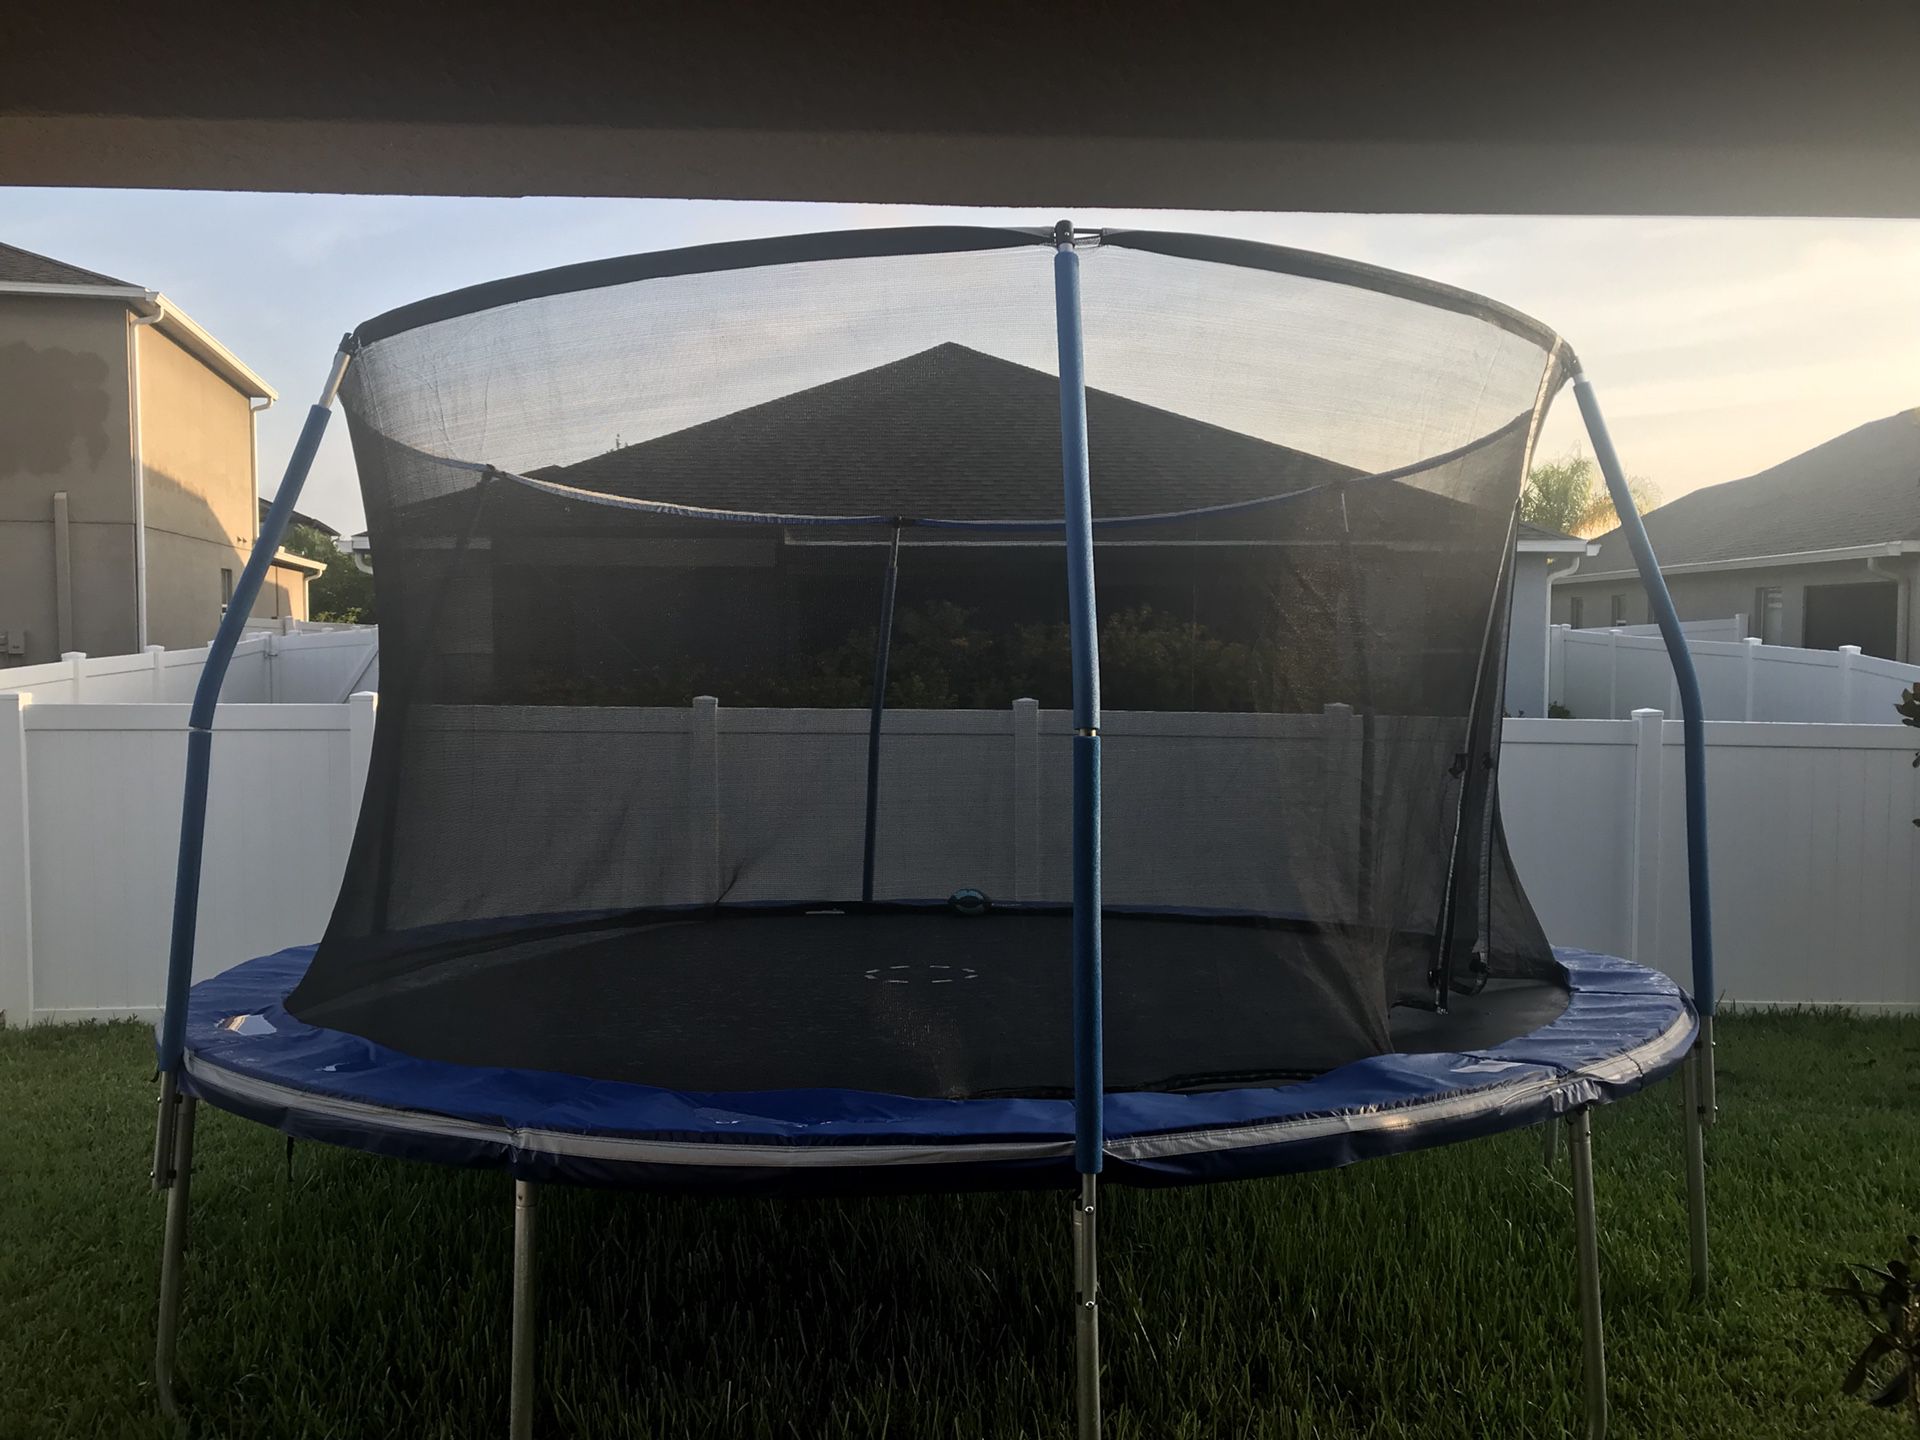 15’ Trampoline with Net and Basketball Hoop.